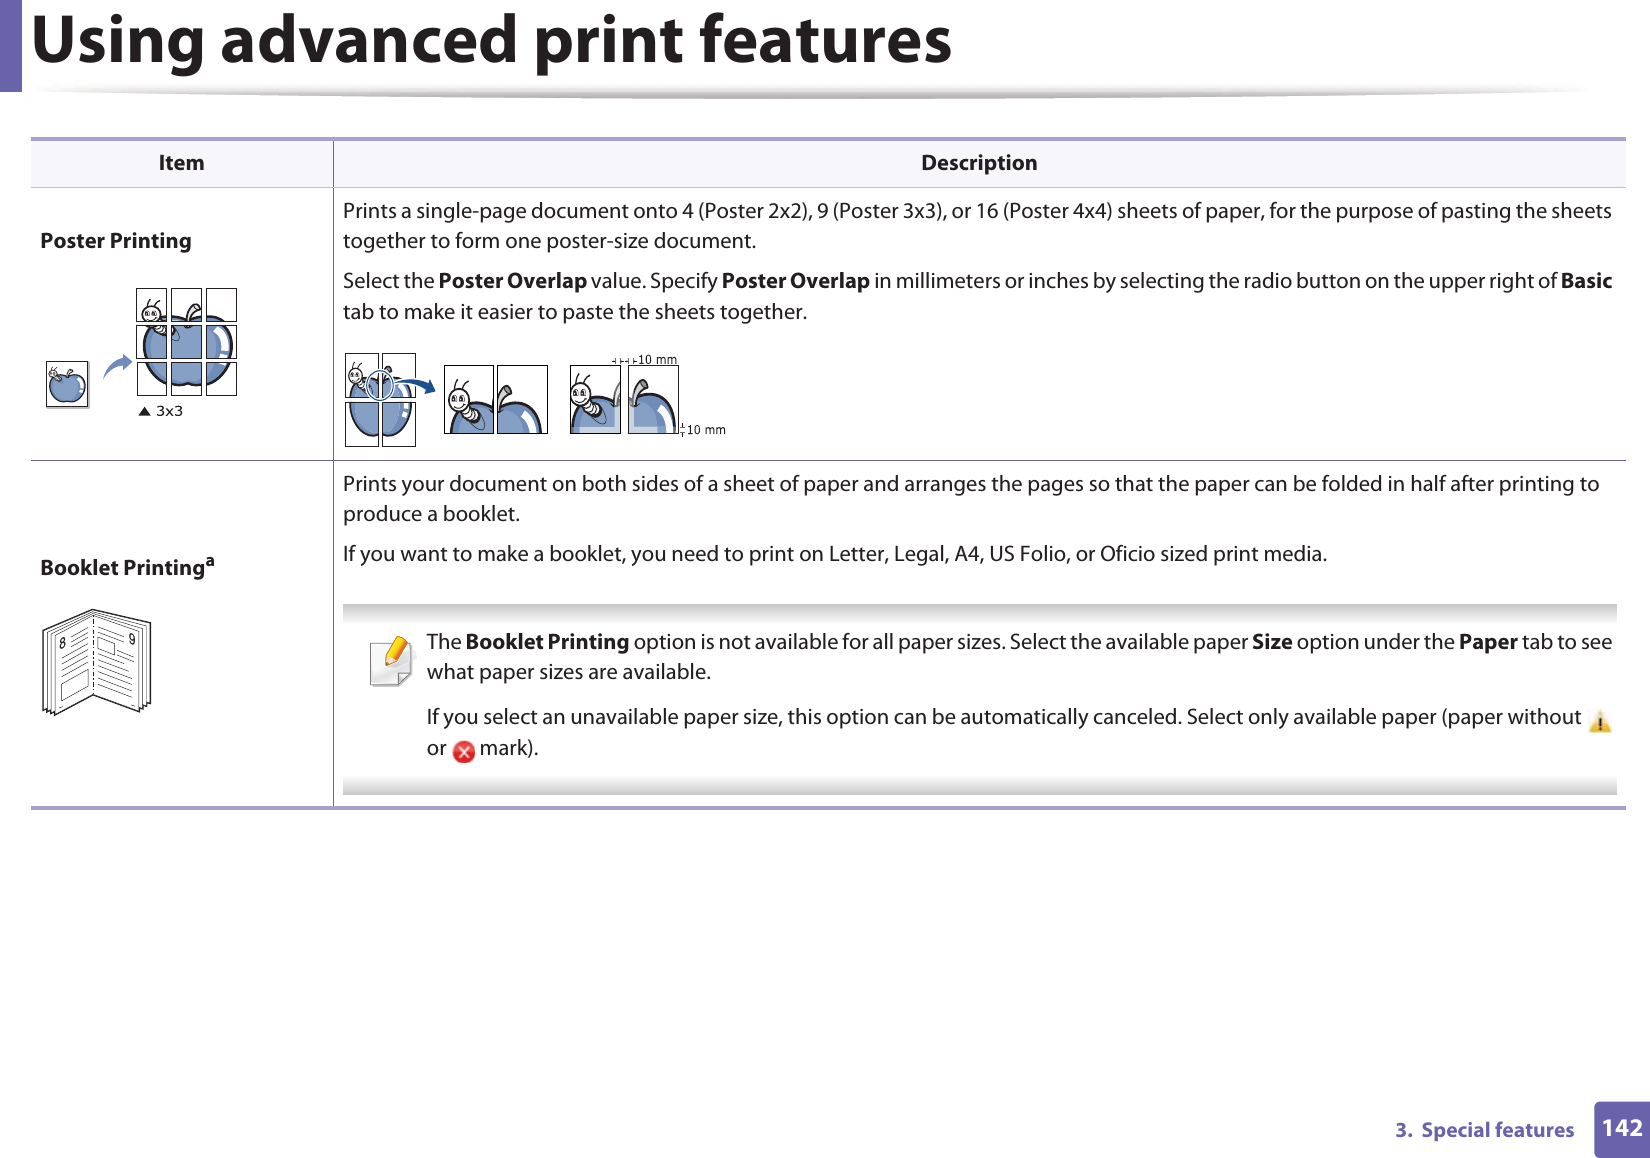 Using advanced print features1423.  Special featuresPoster PrintingPrints a single-page document onto 4 (Poster 2x2), 9 (Poster 3x3), or 16 (Poster 4x4) sheets of paper, for the purpose of pasting the sheets together to form one poster-size document.Select the Poster Overlap value. Specify Poster Overlap in millimeters or inches by selecting the radio button on the upper right of Basic tab to make it easier to paste the sheets together.Booklet PrintingaPrints your document on both sides of a sheet of paper and arranges the pages so that the paper can be folded in half after printing to produce a booklet.If you want to make a booklet, you need to print on Letter, Legal, A4, US Folio, or Oficio sized print media.  The Booklet Printing option is not available for all paper sizes. Select the available paper Size option under the Paper tab to see what paper sizes are available.If you select an unavailable paper size, this option can be automatically canceled. Select only available paper (paper without   or  mark). Item Description89